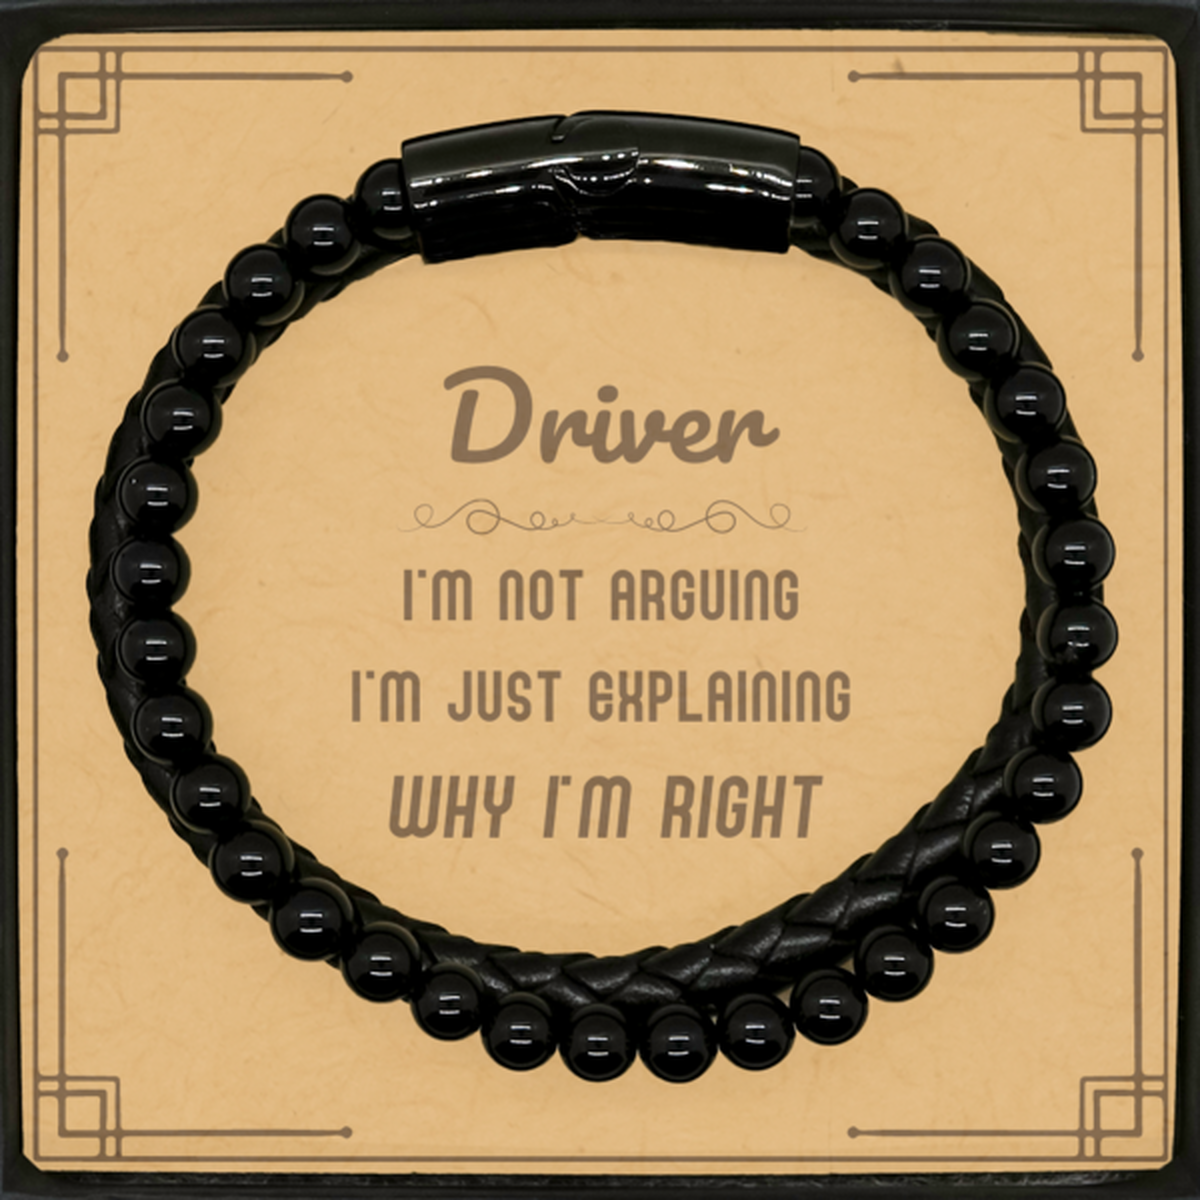 Driver I'm not Arguing. I'm Just Explaining Why I'm RIGHT Stone Leather Bracelets, Funny Saying Quote Driver Gifts For Driver Message Card Graduation Birthday Christmas Gifts for Men Women Coworker